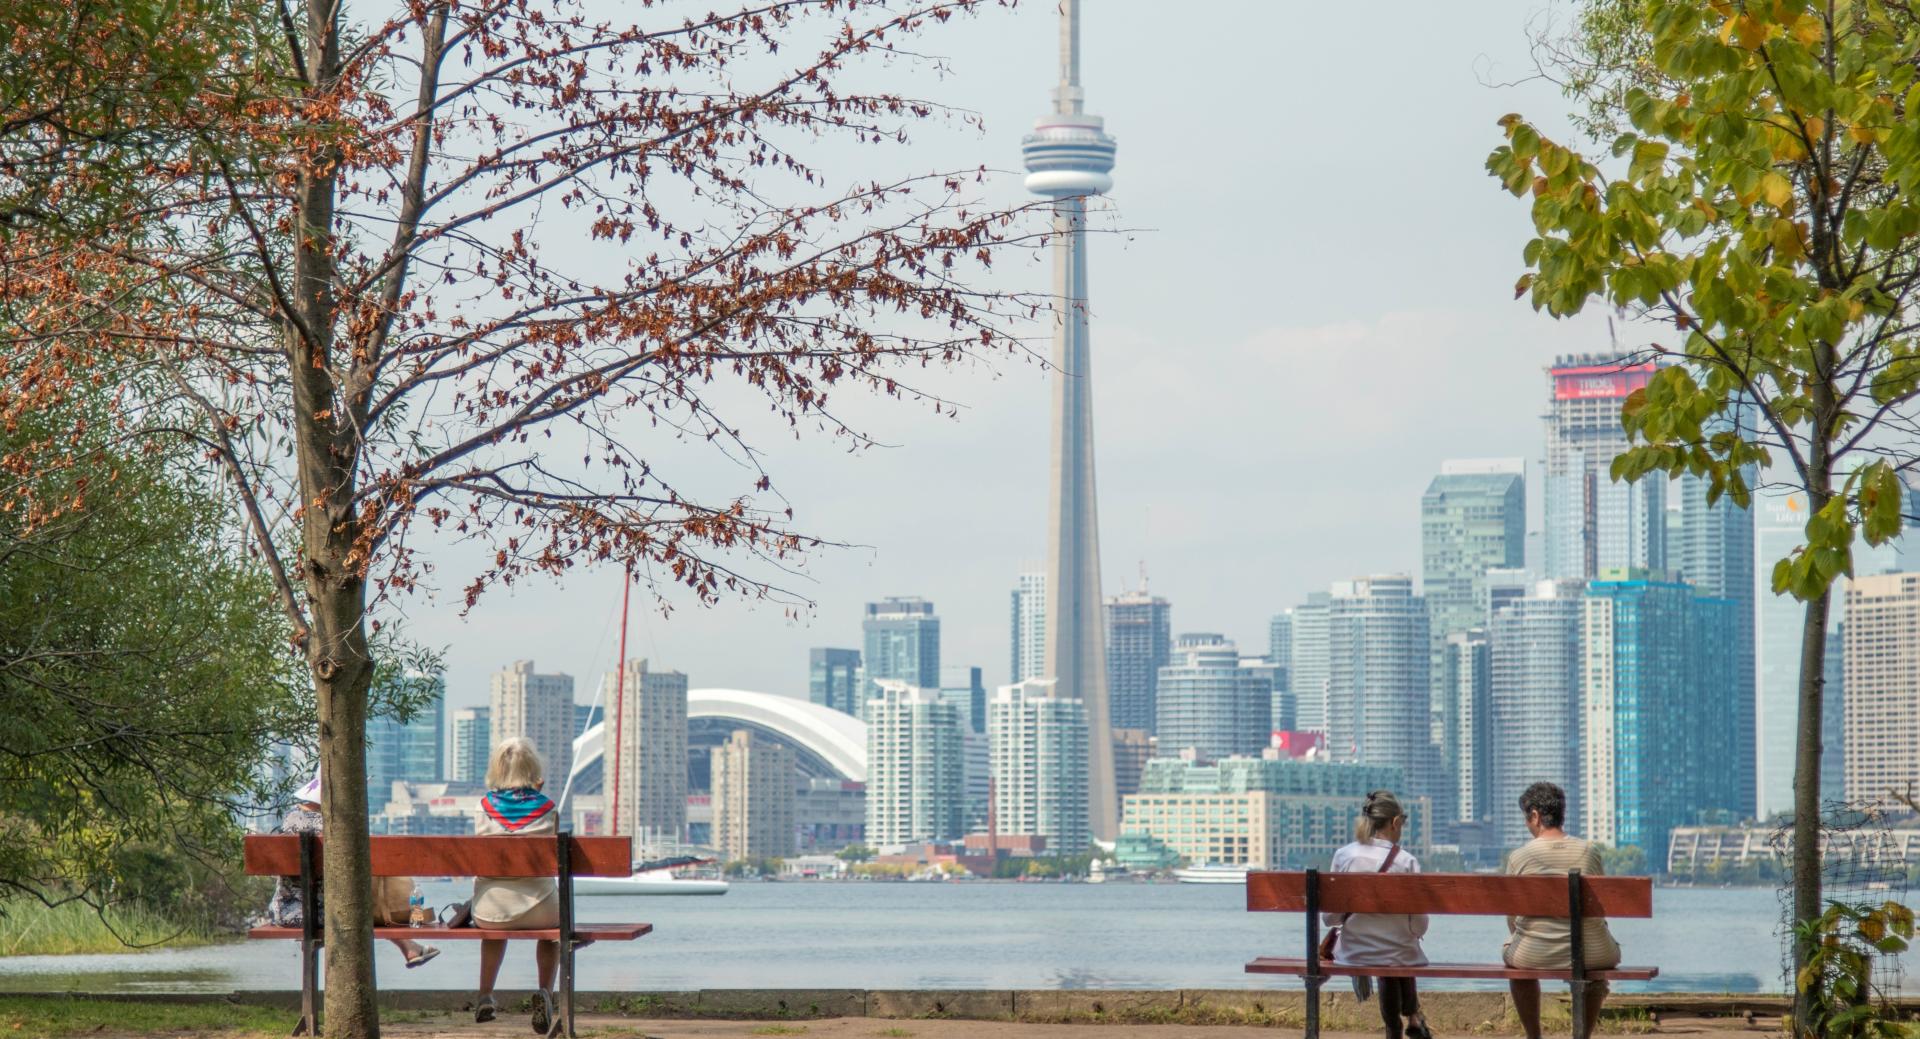 Photograph of Toronto's CN Tower from the perspective of the Toronto Islands